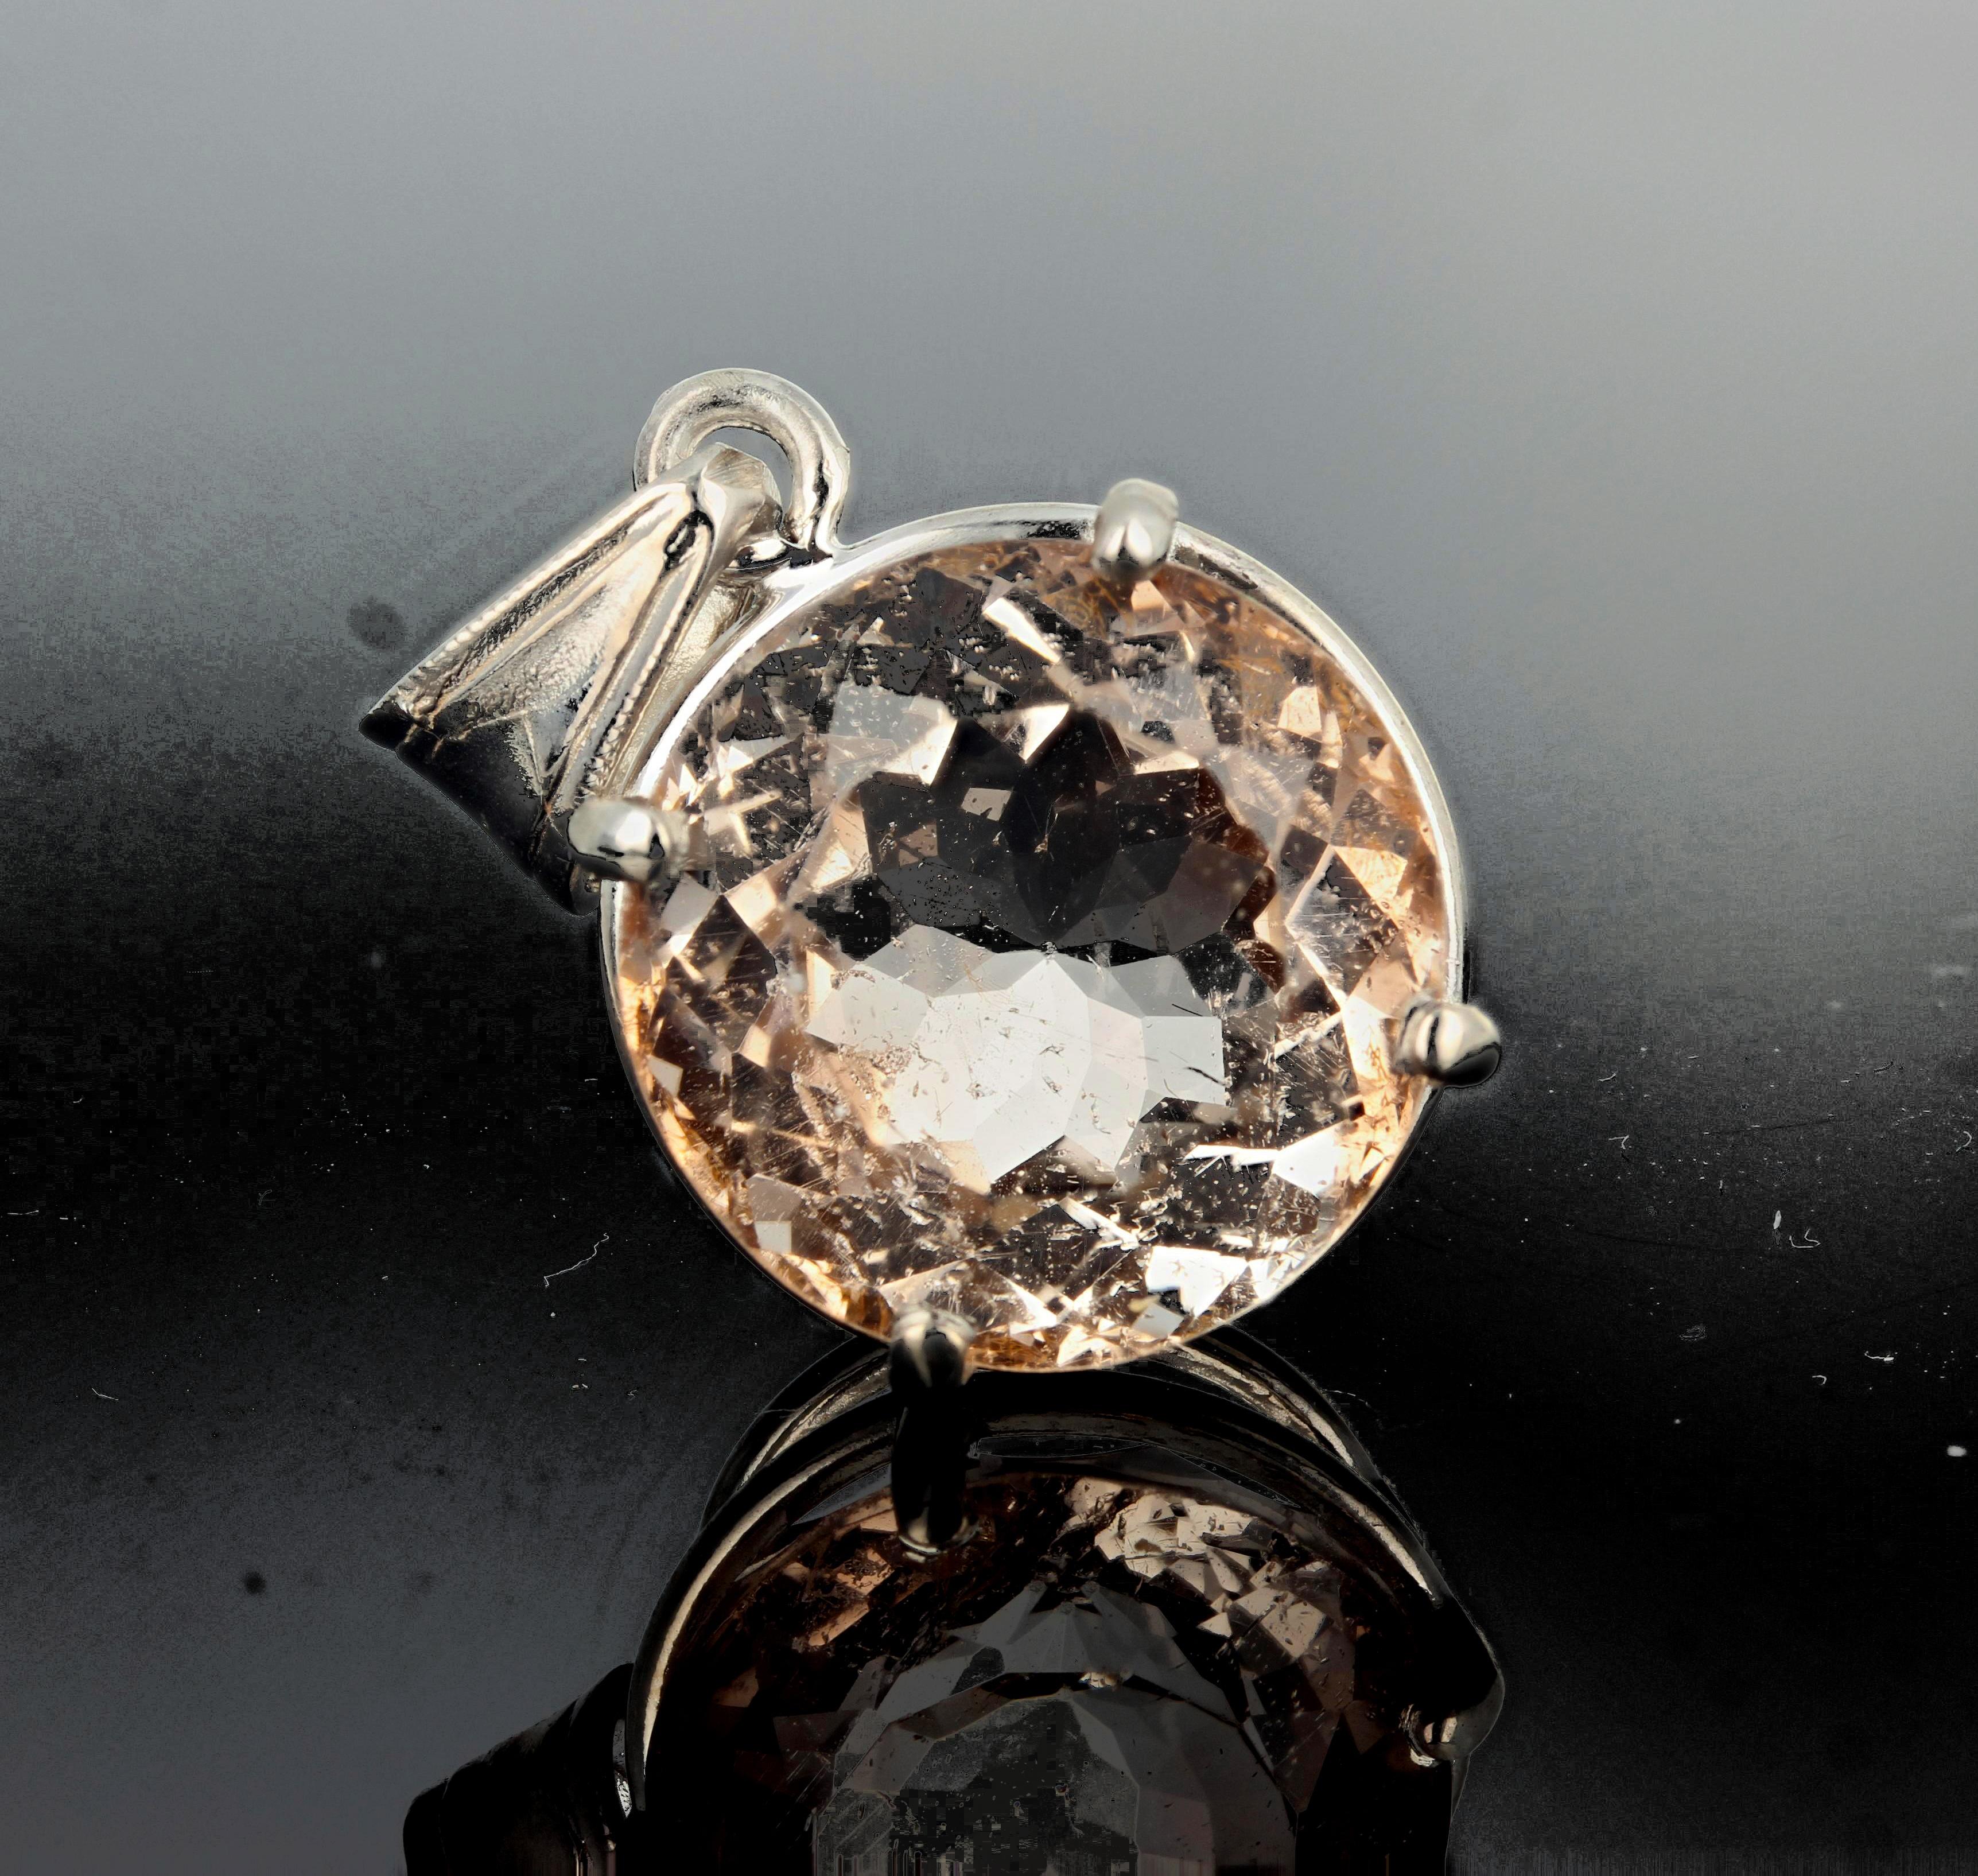 Glittering huge unique round (16 carats) pinky tan natural translucent Morganite (17 mm) set in a sterling silver pendant.  This hangs approximately 1.17 inches long.  Spectacular optical effect in the Morganite exhibits gold reflections and fire